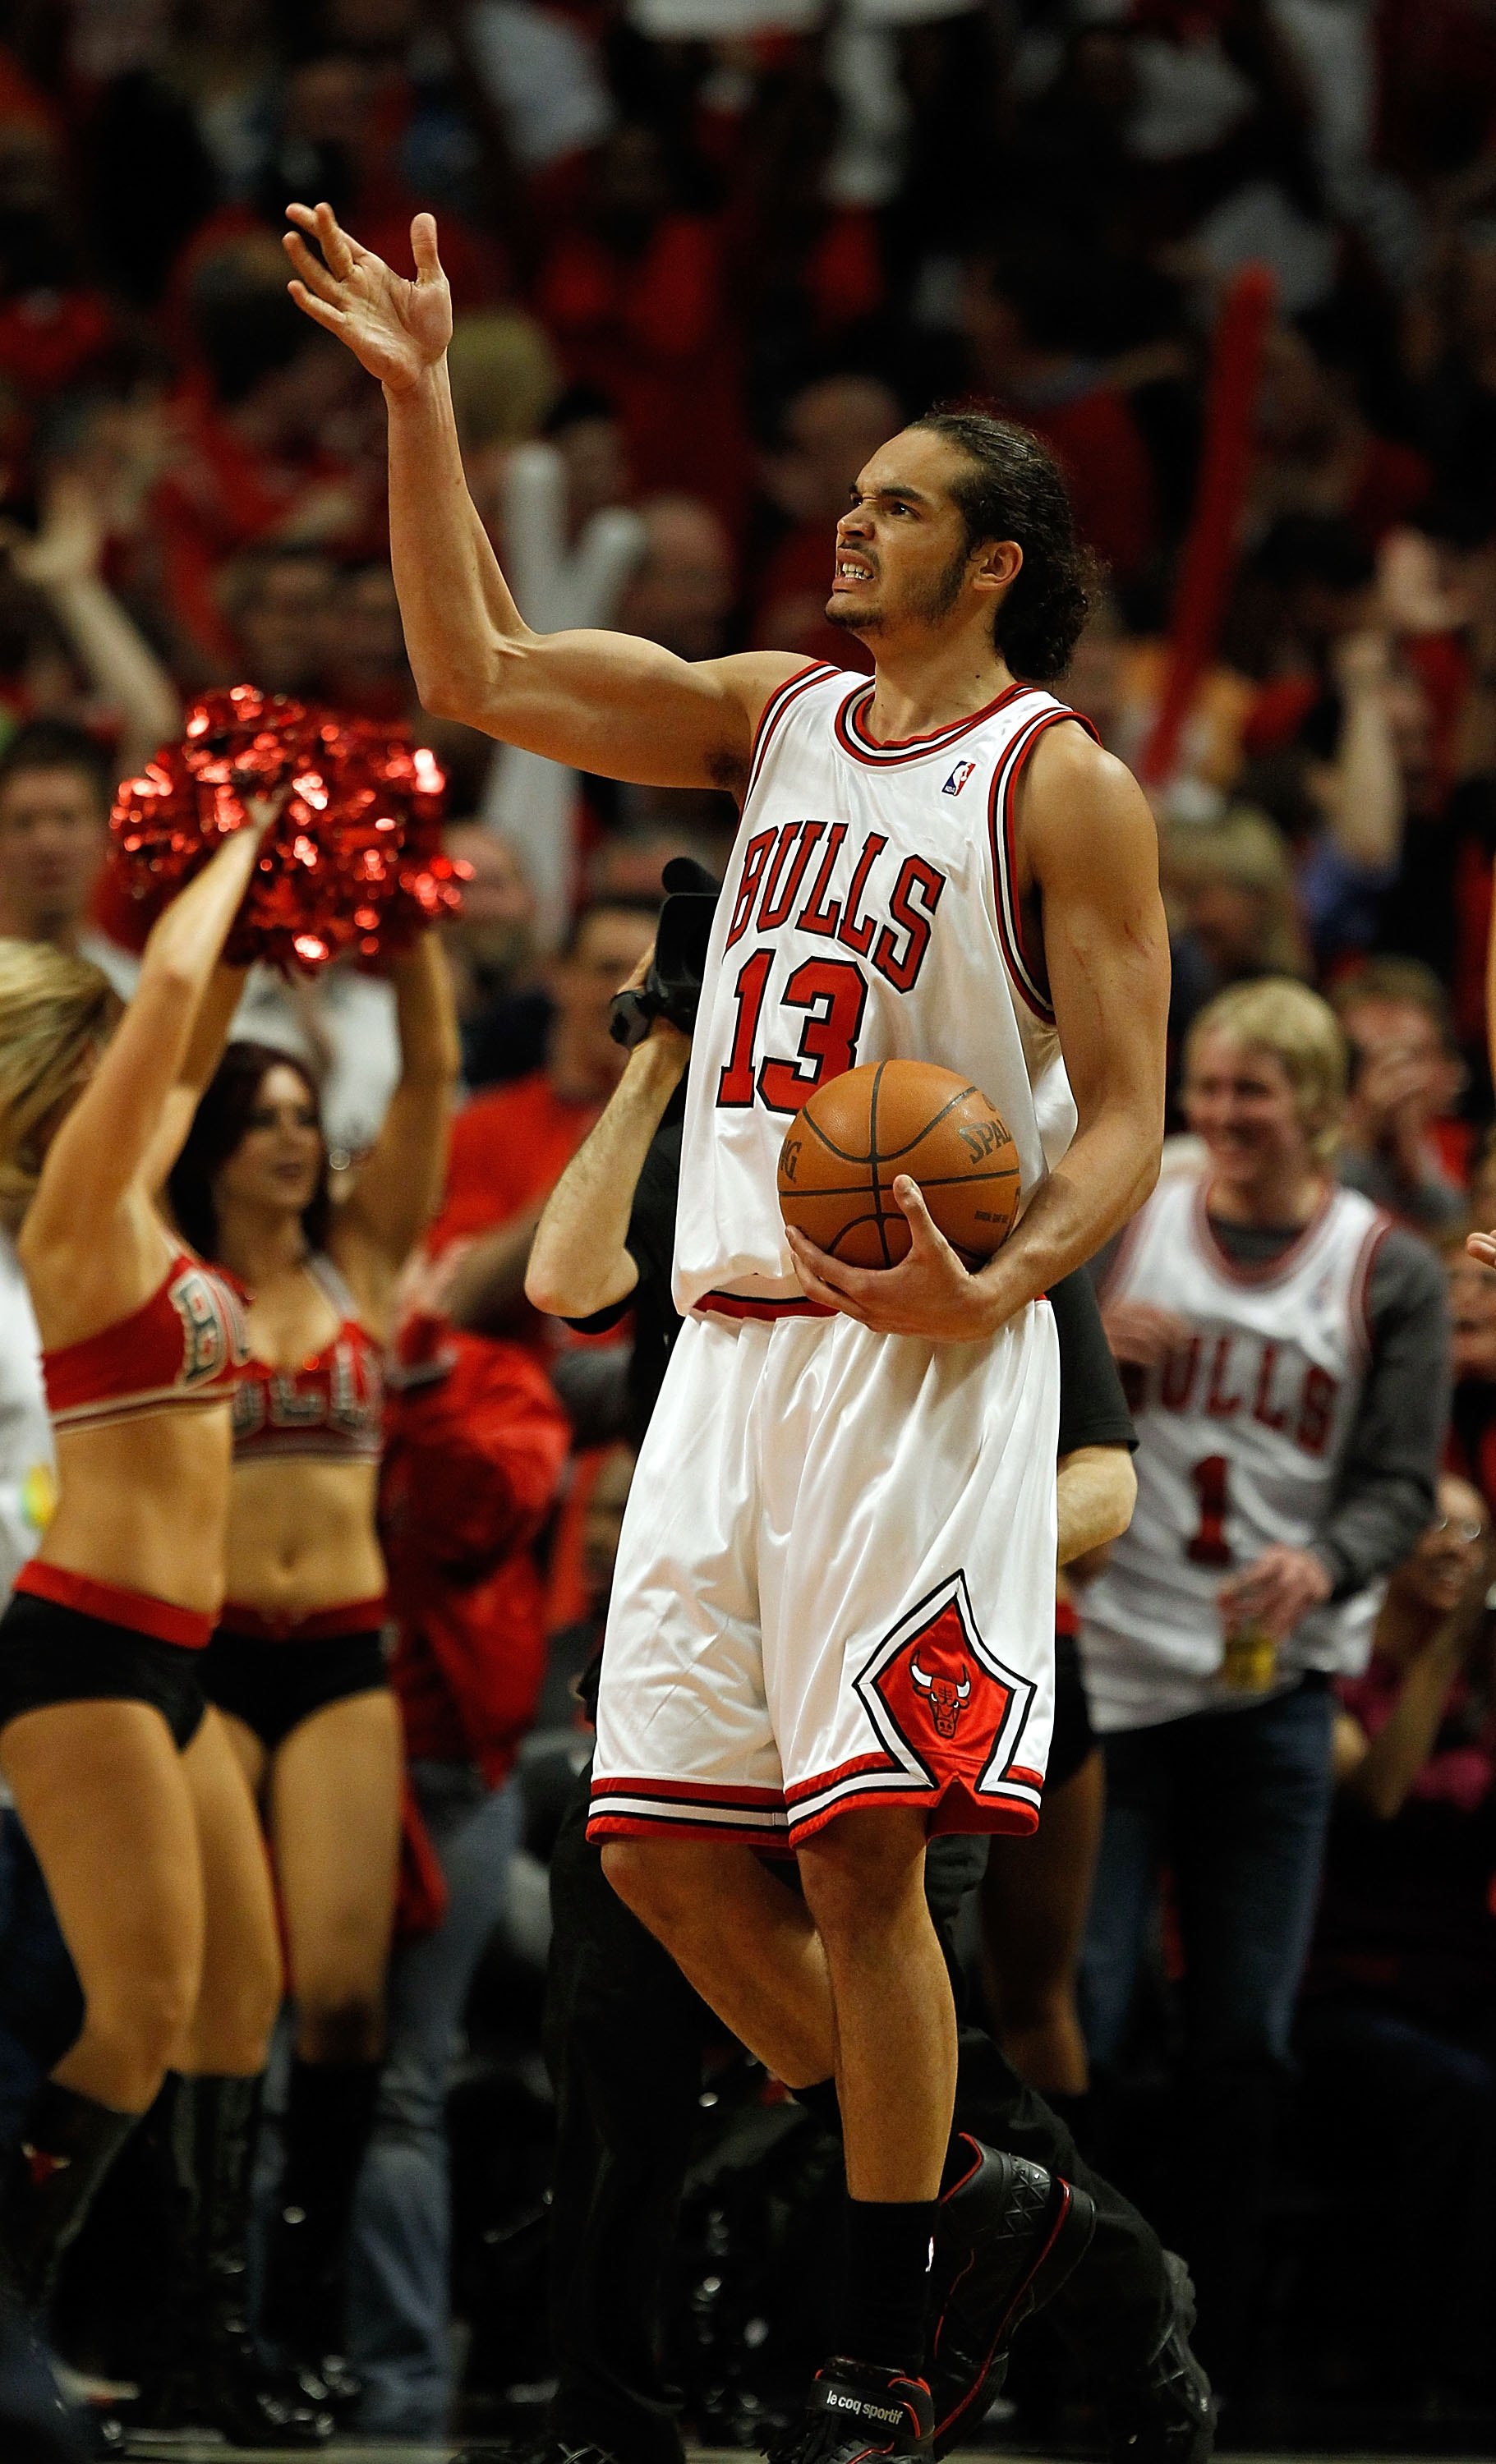 Joakim Noah blows a kiss to his adoring fans in Chicago.